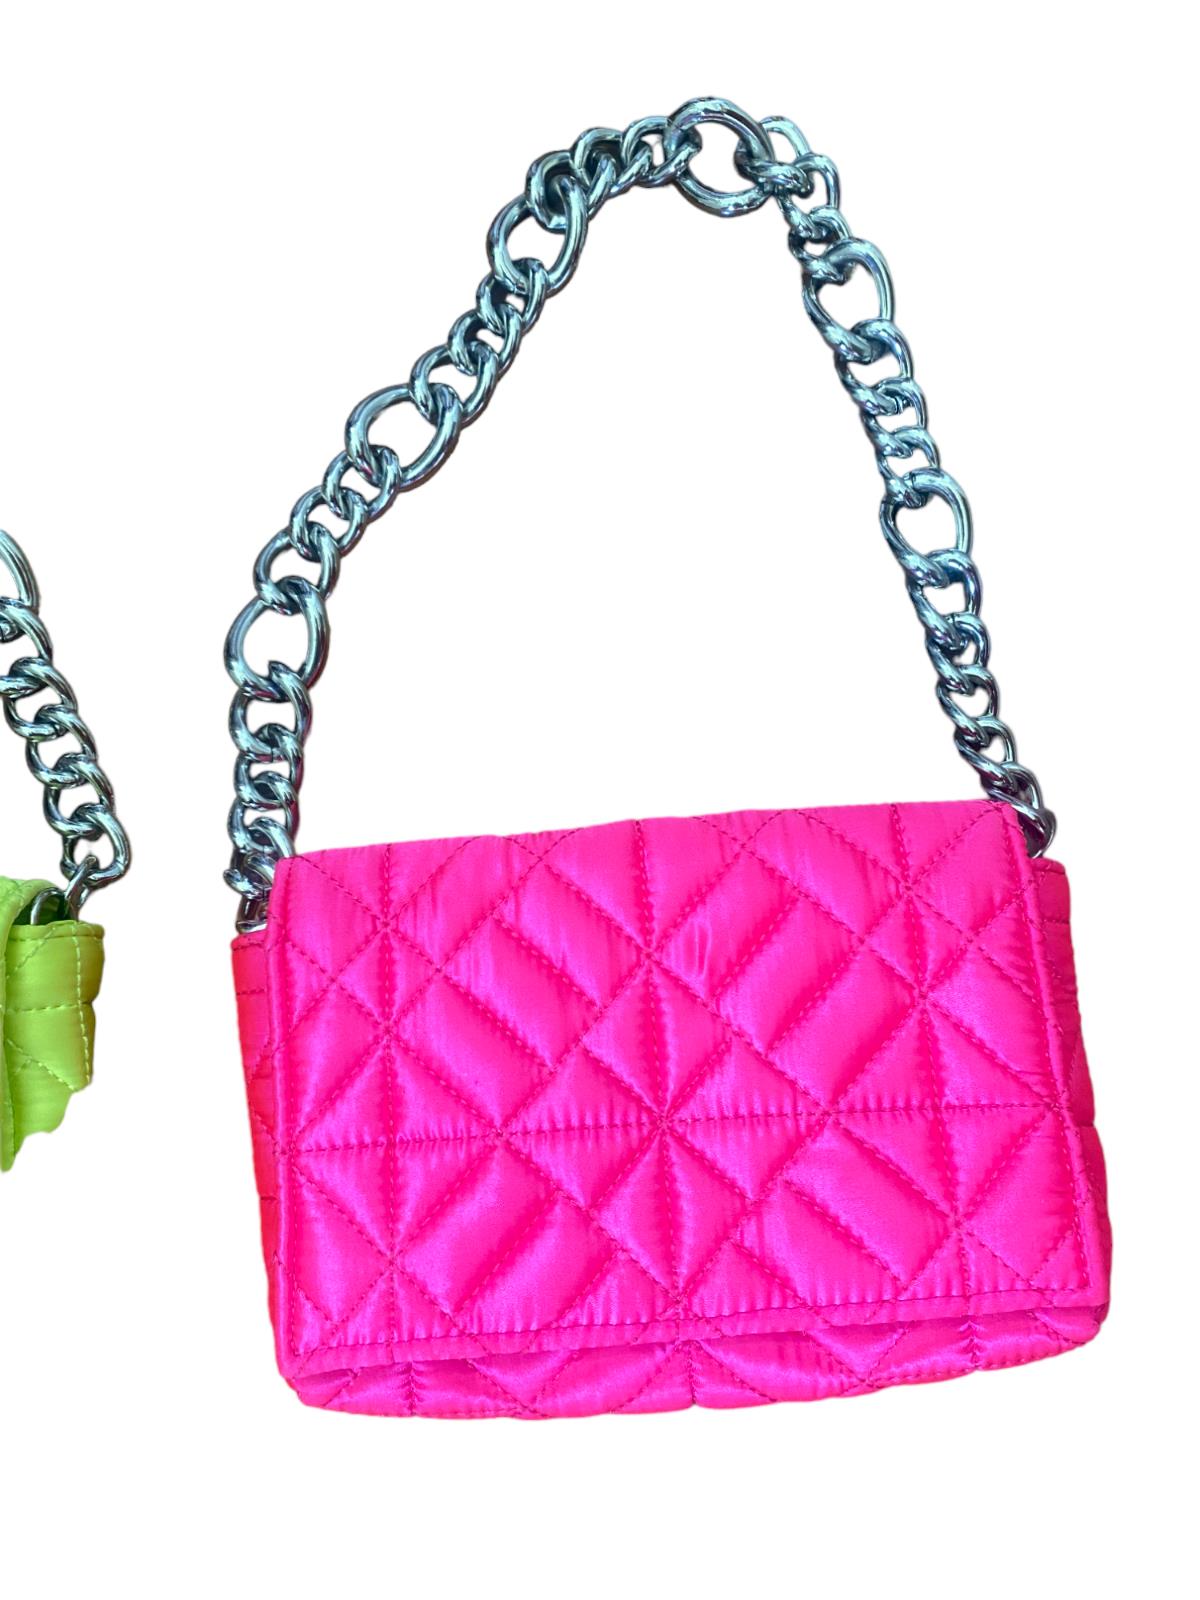 2 x ZARA Neon Quilted Handbags | Yellow & Pink, Fabric, Thick Silver Chain